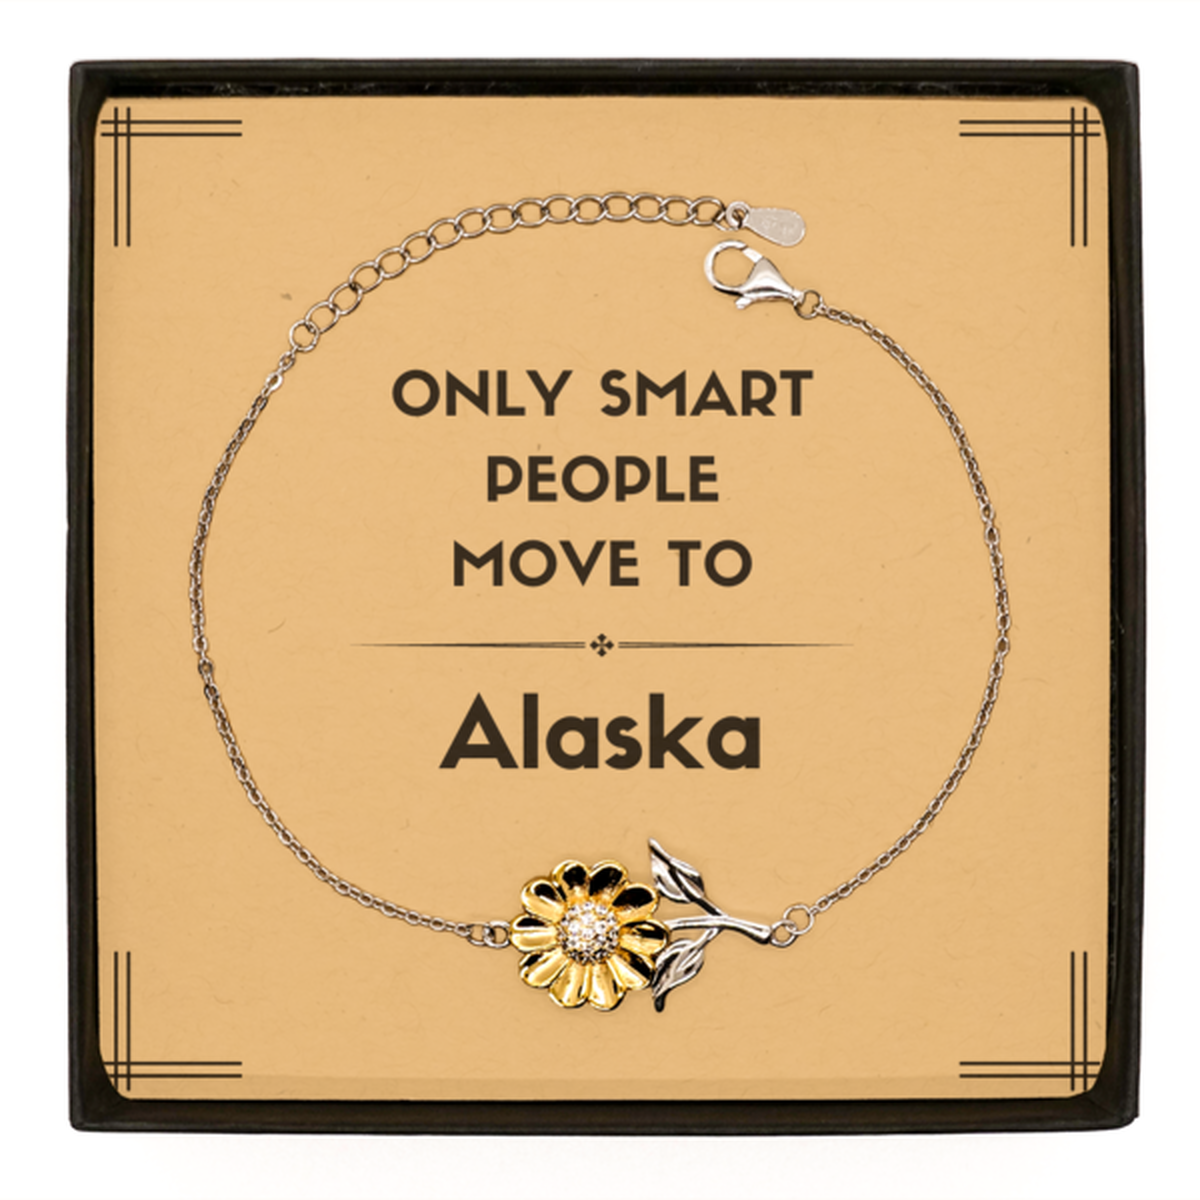 Only smart people move to Alaska Sunflower Bracelet, Message Card Gifts For Alaska, Move to Alaska Gifts for Friends Coworker Funny Saying Quote